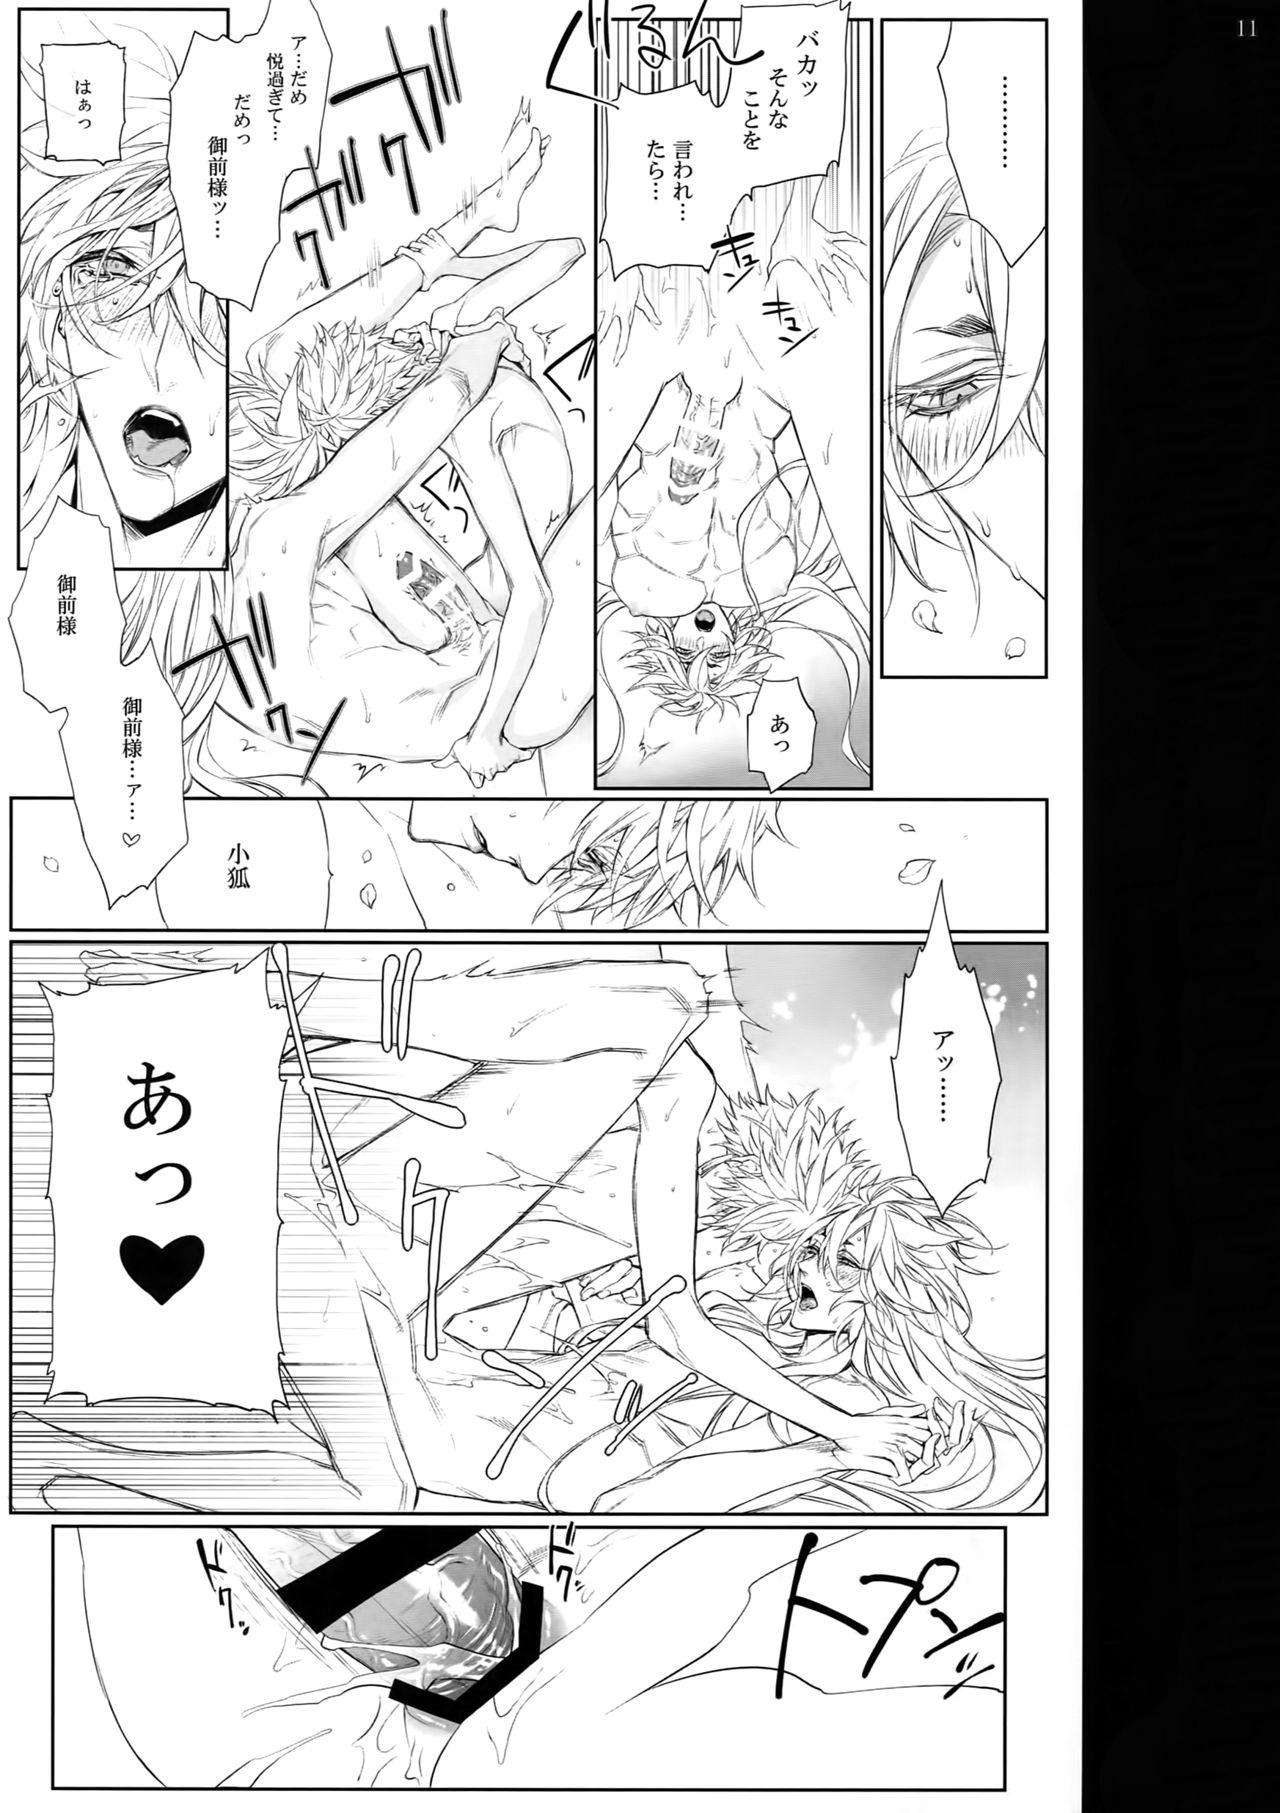 Milfporn HOLD ON - Touken ranbu Whooty - Page 10